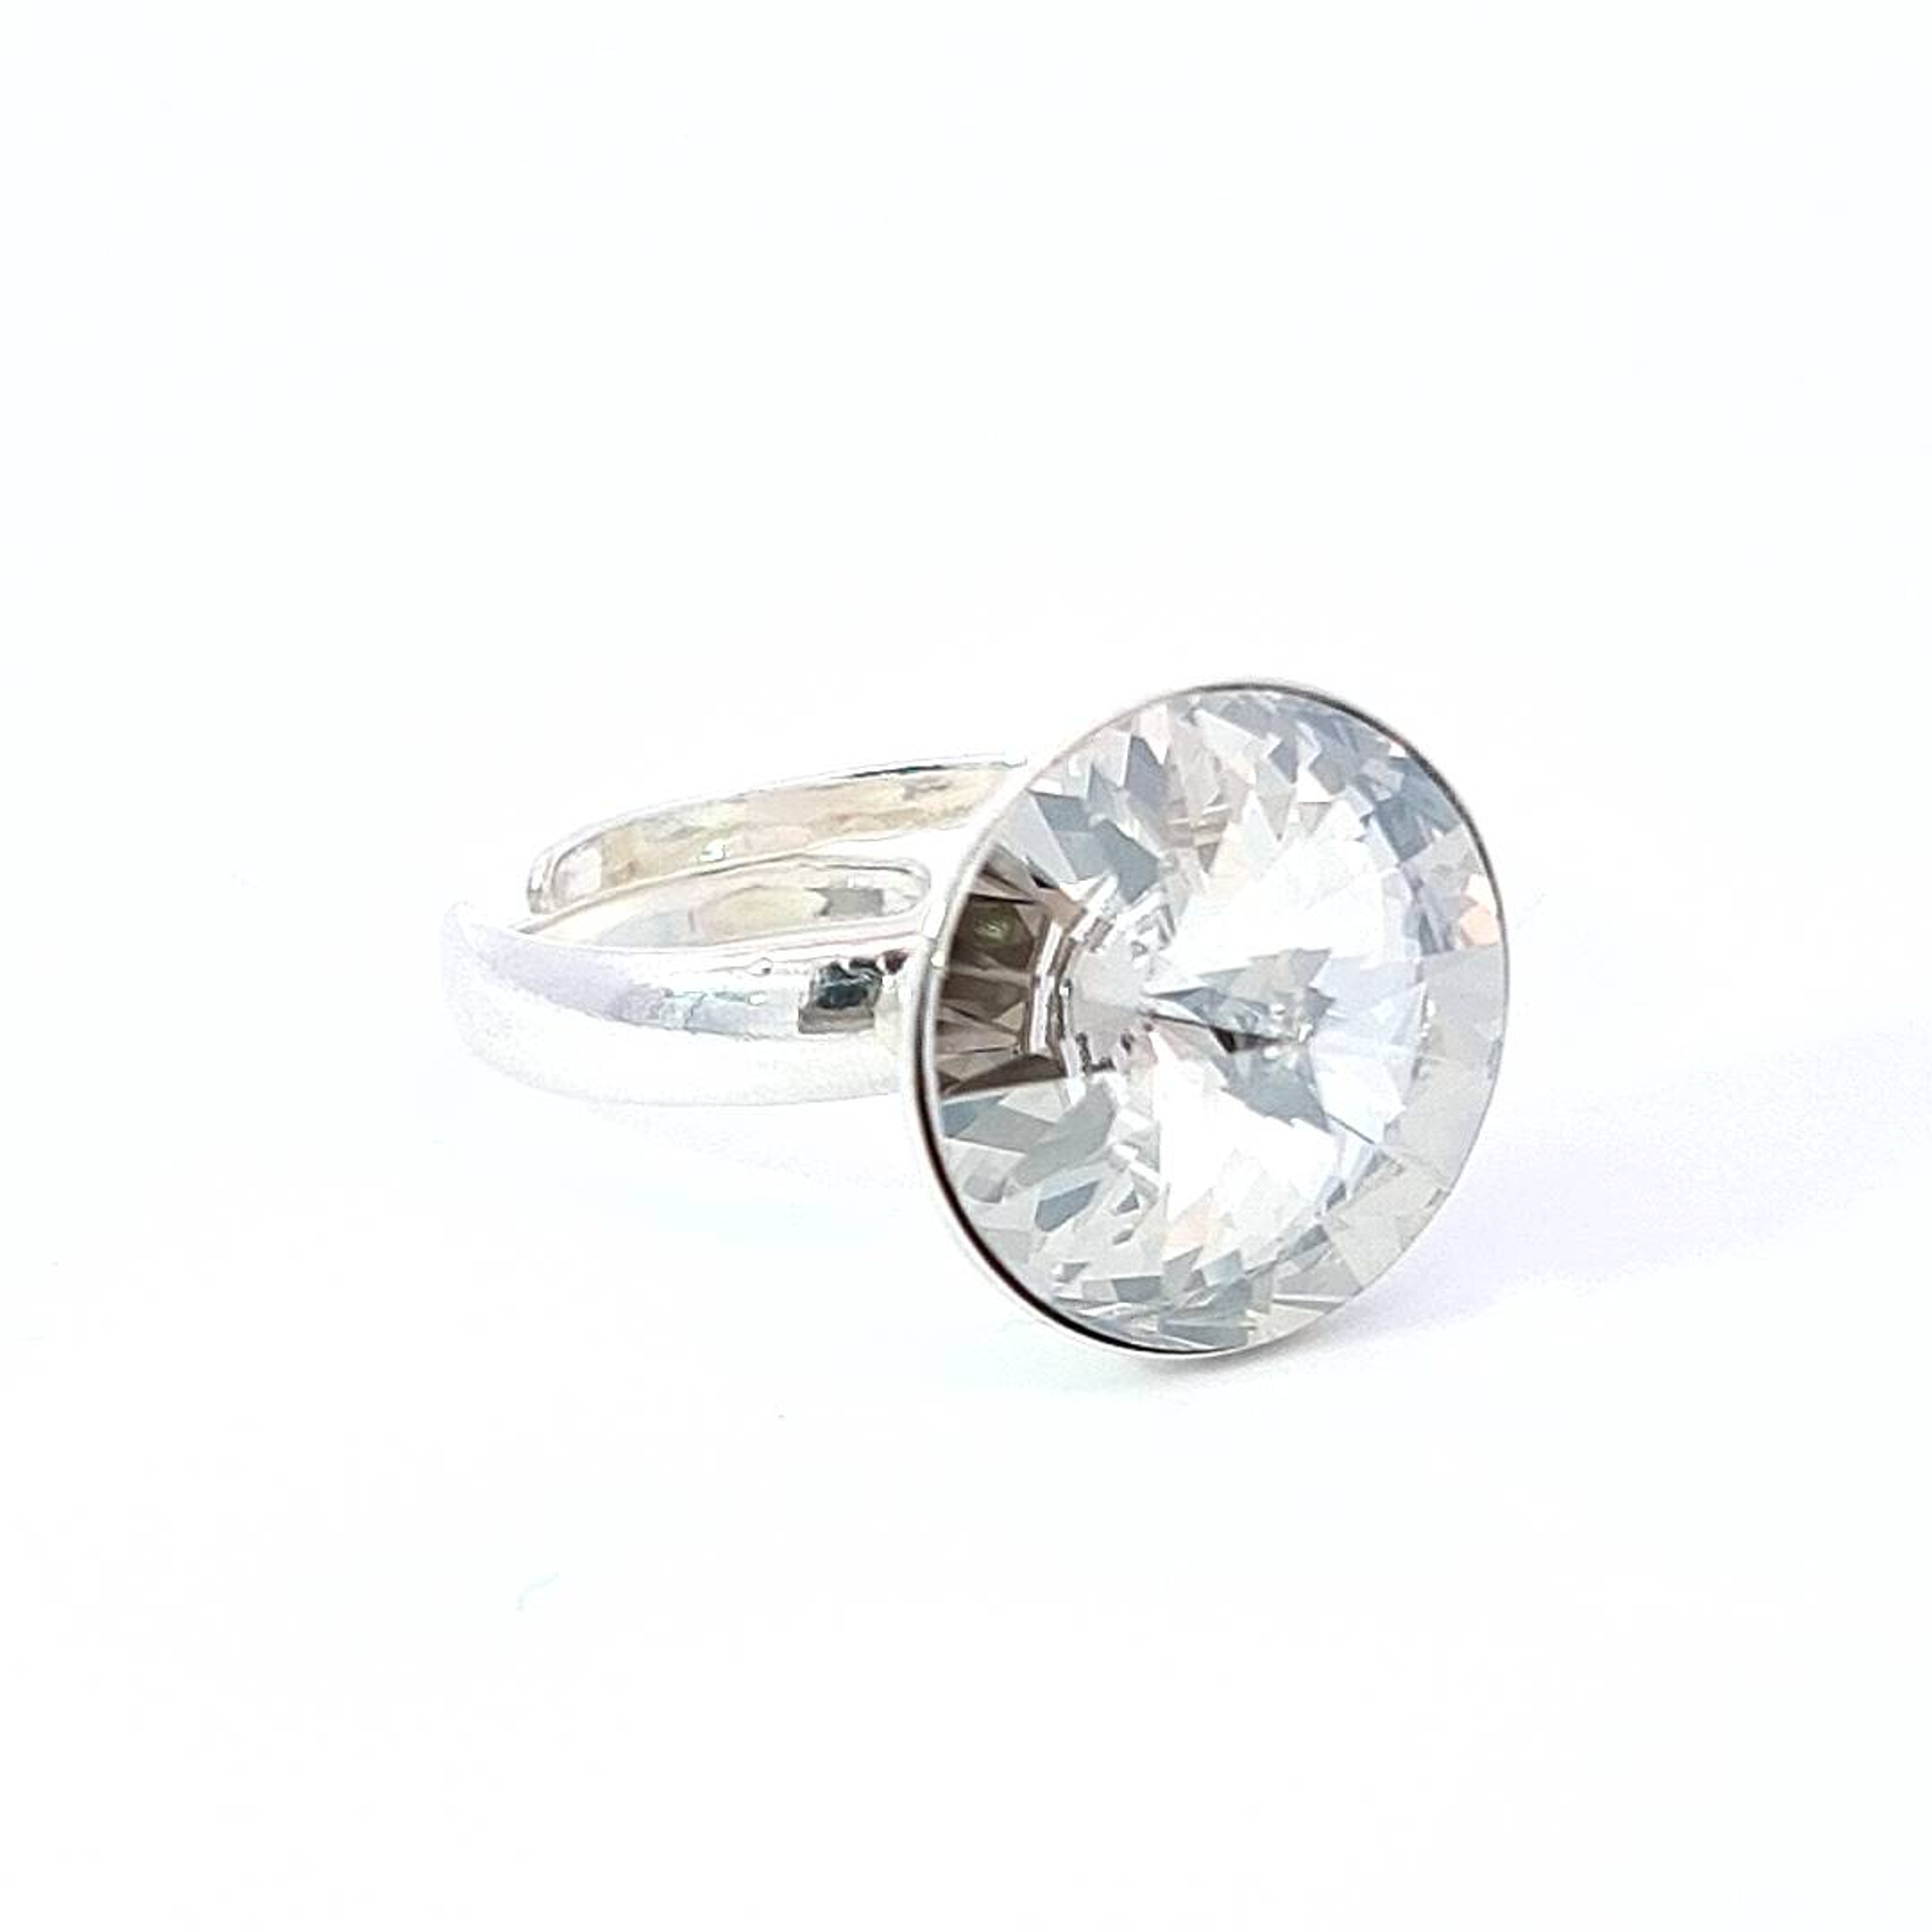 Side View of Spectra Solitaire Ring with Reflective Rivoli Crystal Comet Argent - Magpie Gems Ireland